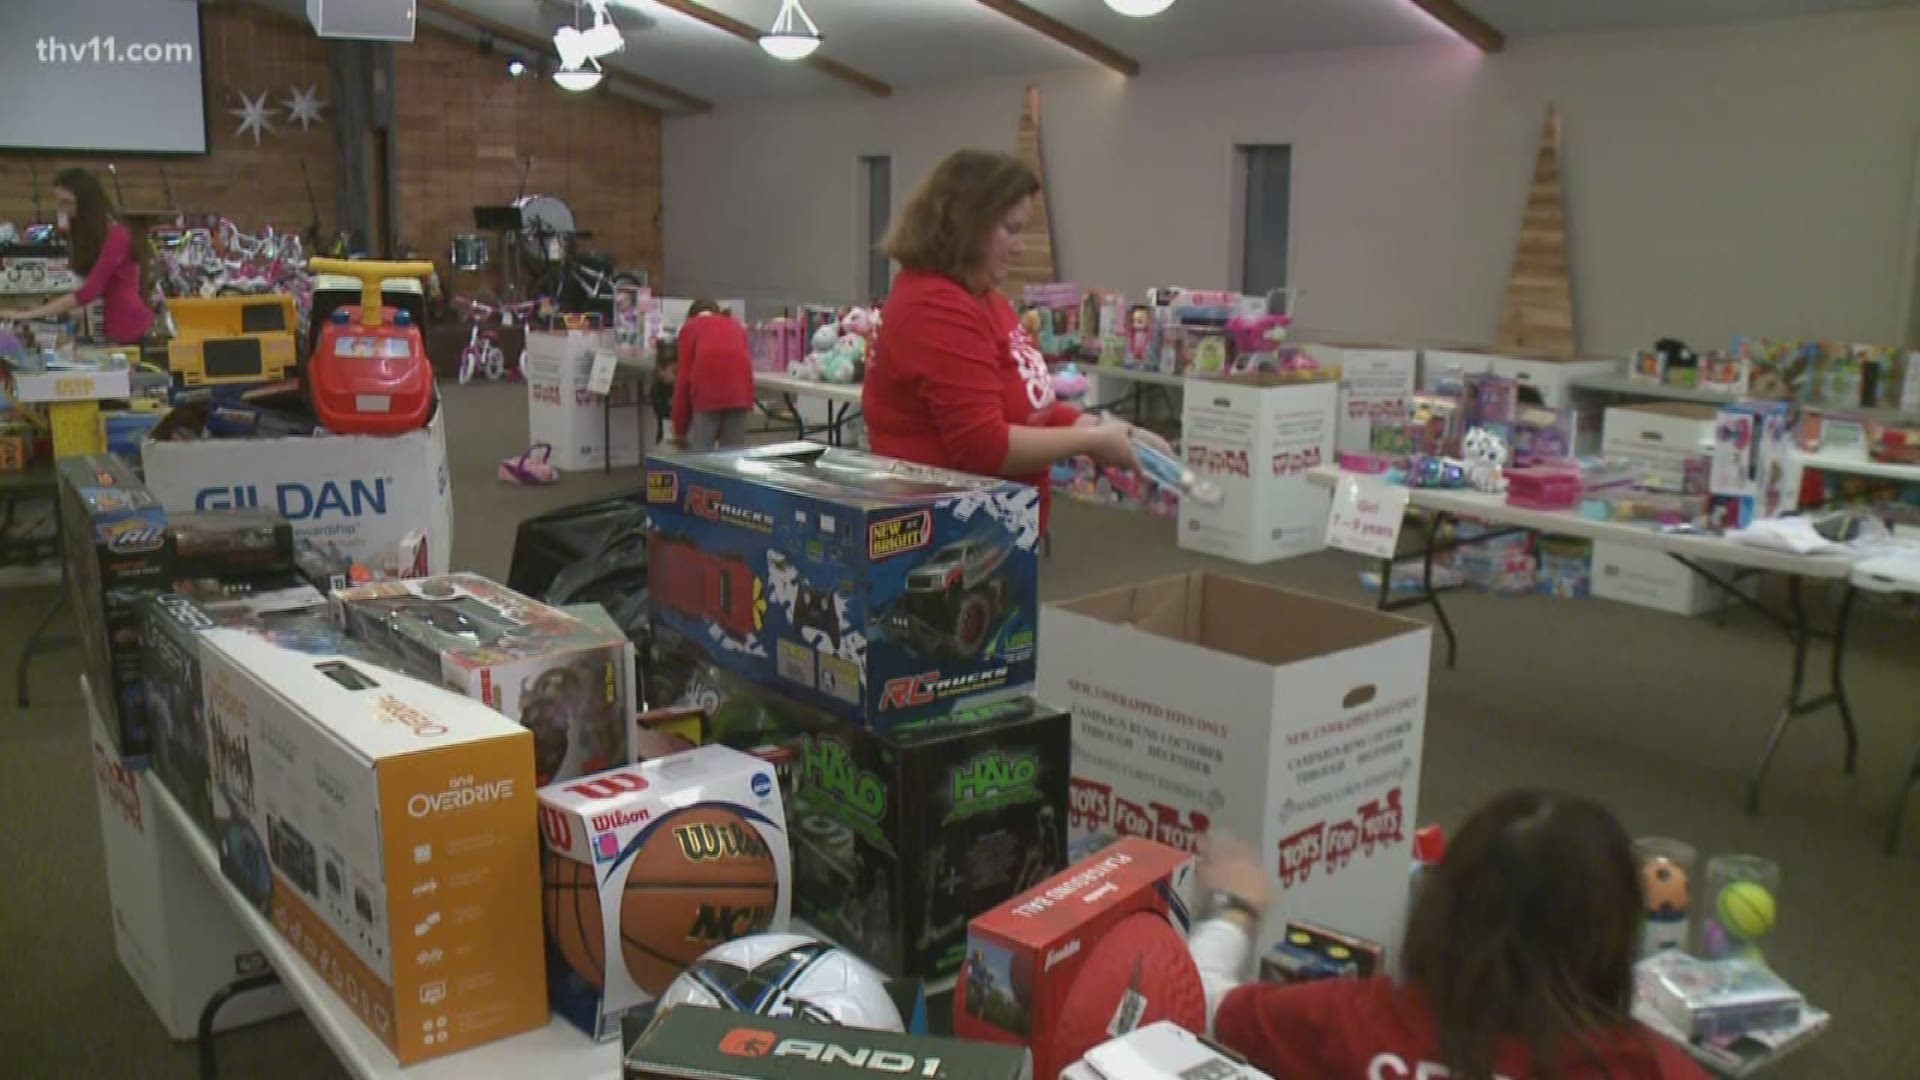 The Arkansas Dream Center is making sure kids who are less fortunate have a very merry Christmas this holiday season.